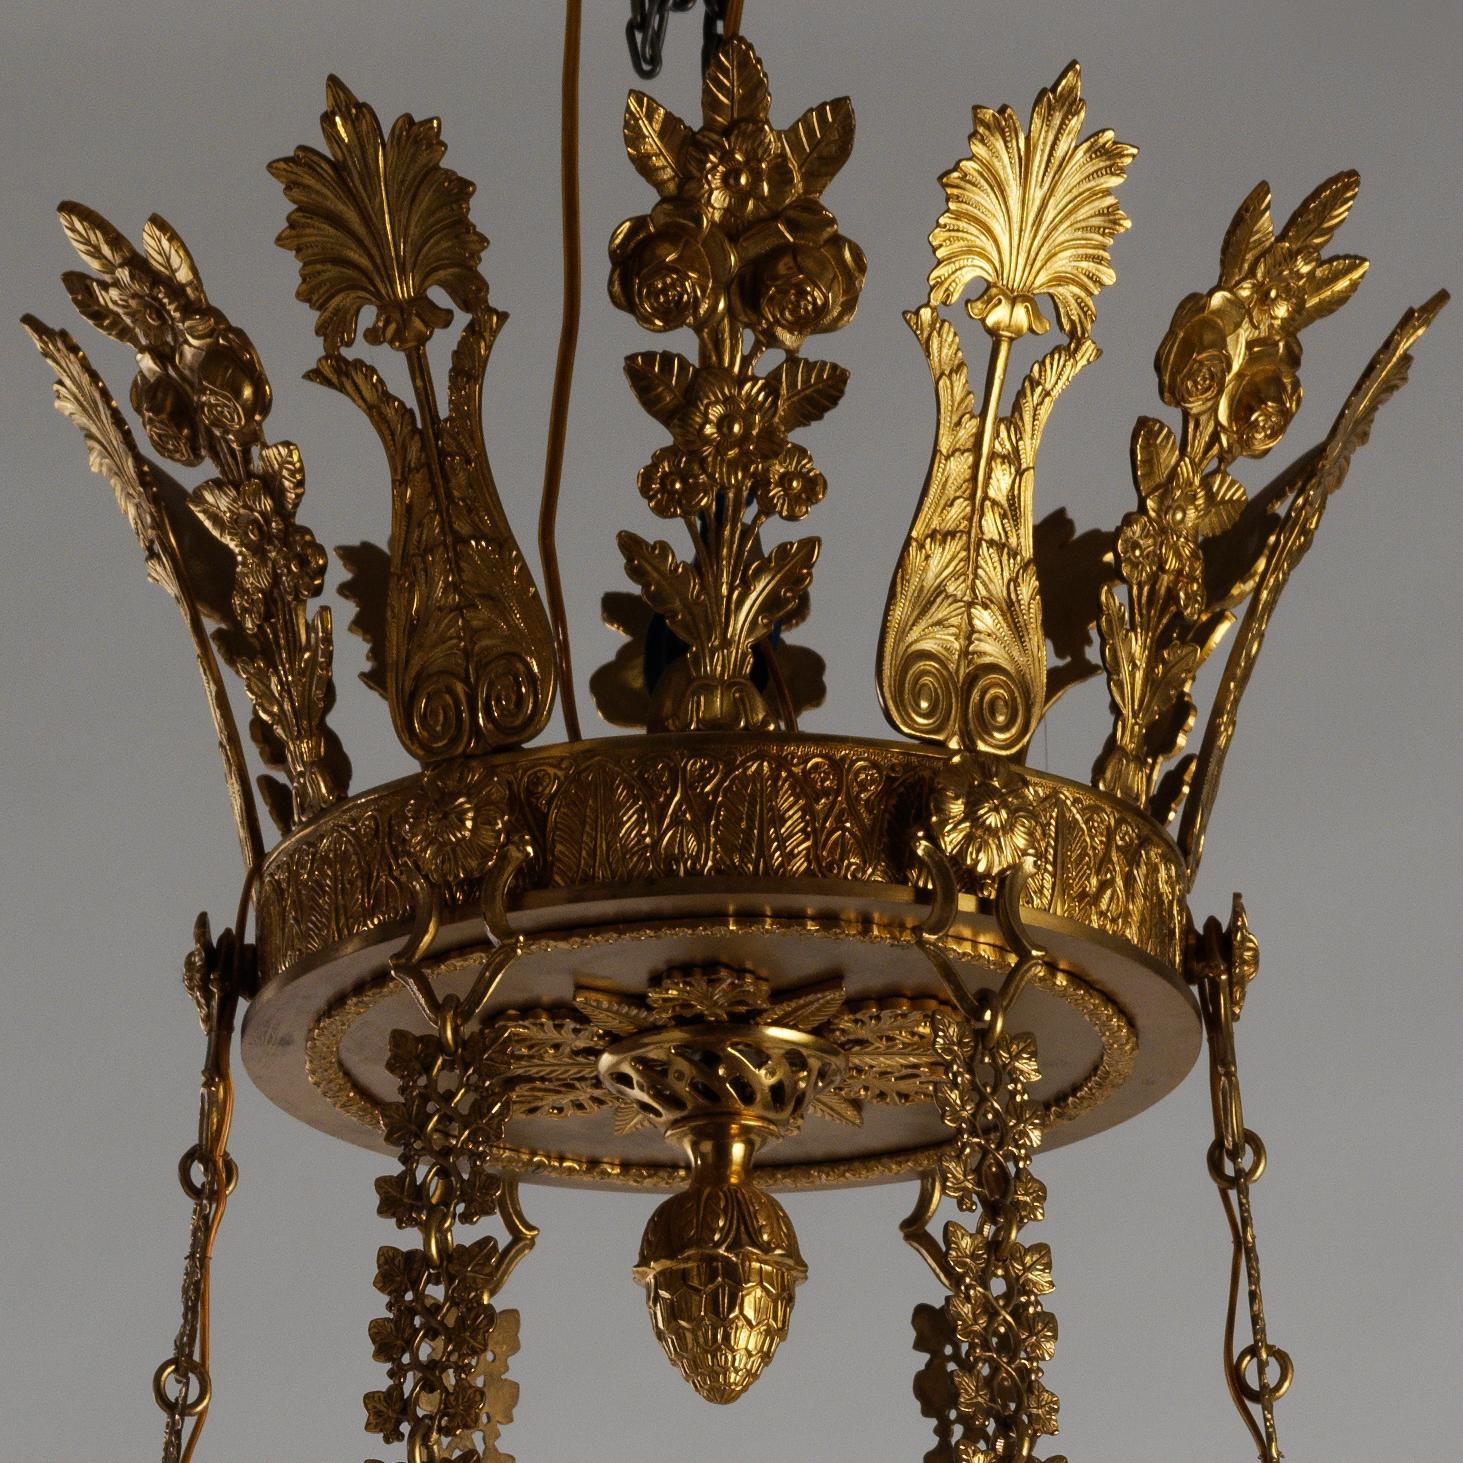 This Russian Empire style gilt bronze chandelier by Gherardo Degli Albizzi features thirty-six lights and a crown decorated with 12 leaves and a pine-cone, from which large chains are leaving downwards. Both rings are decorated with double-armed